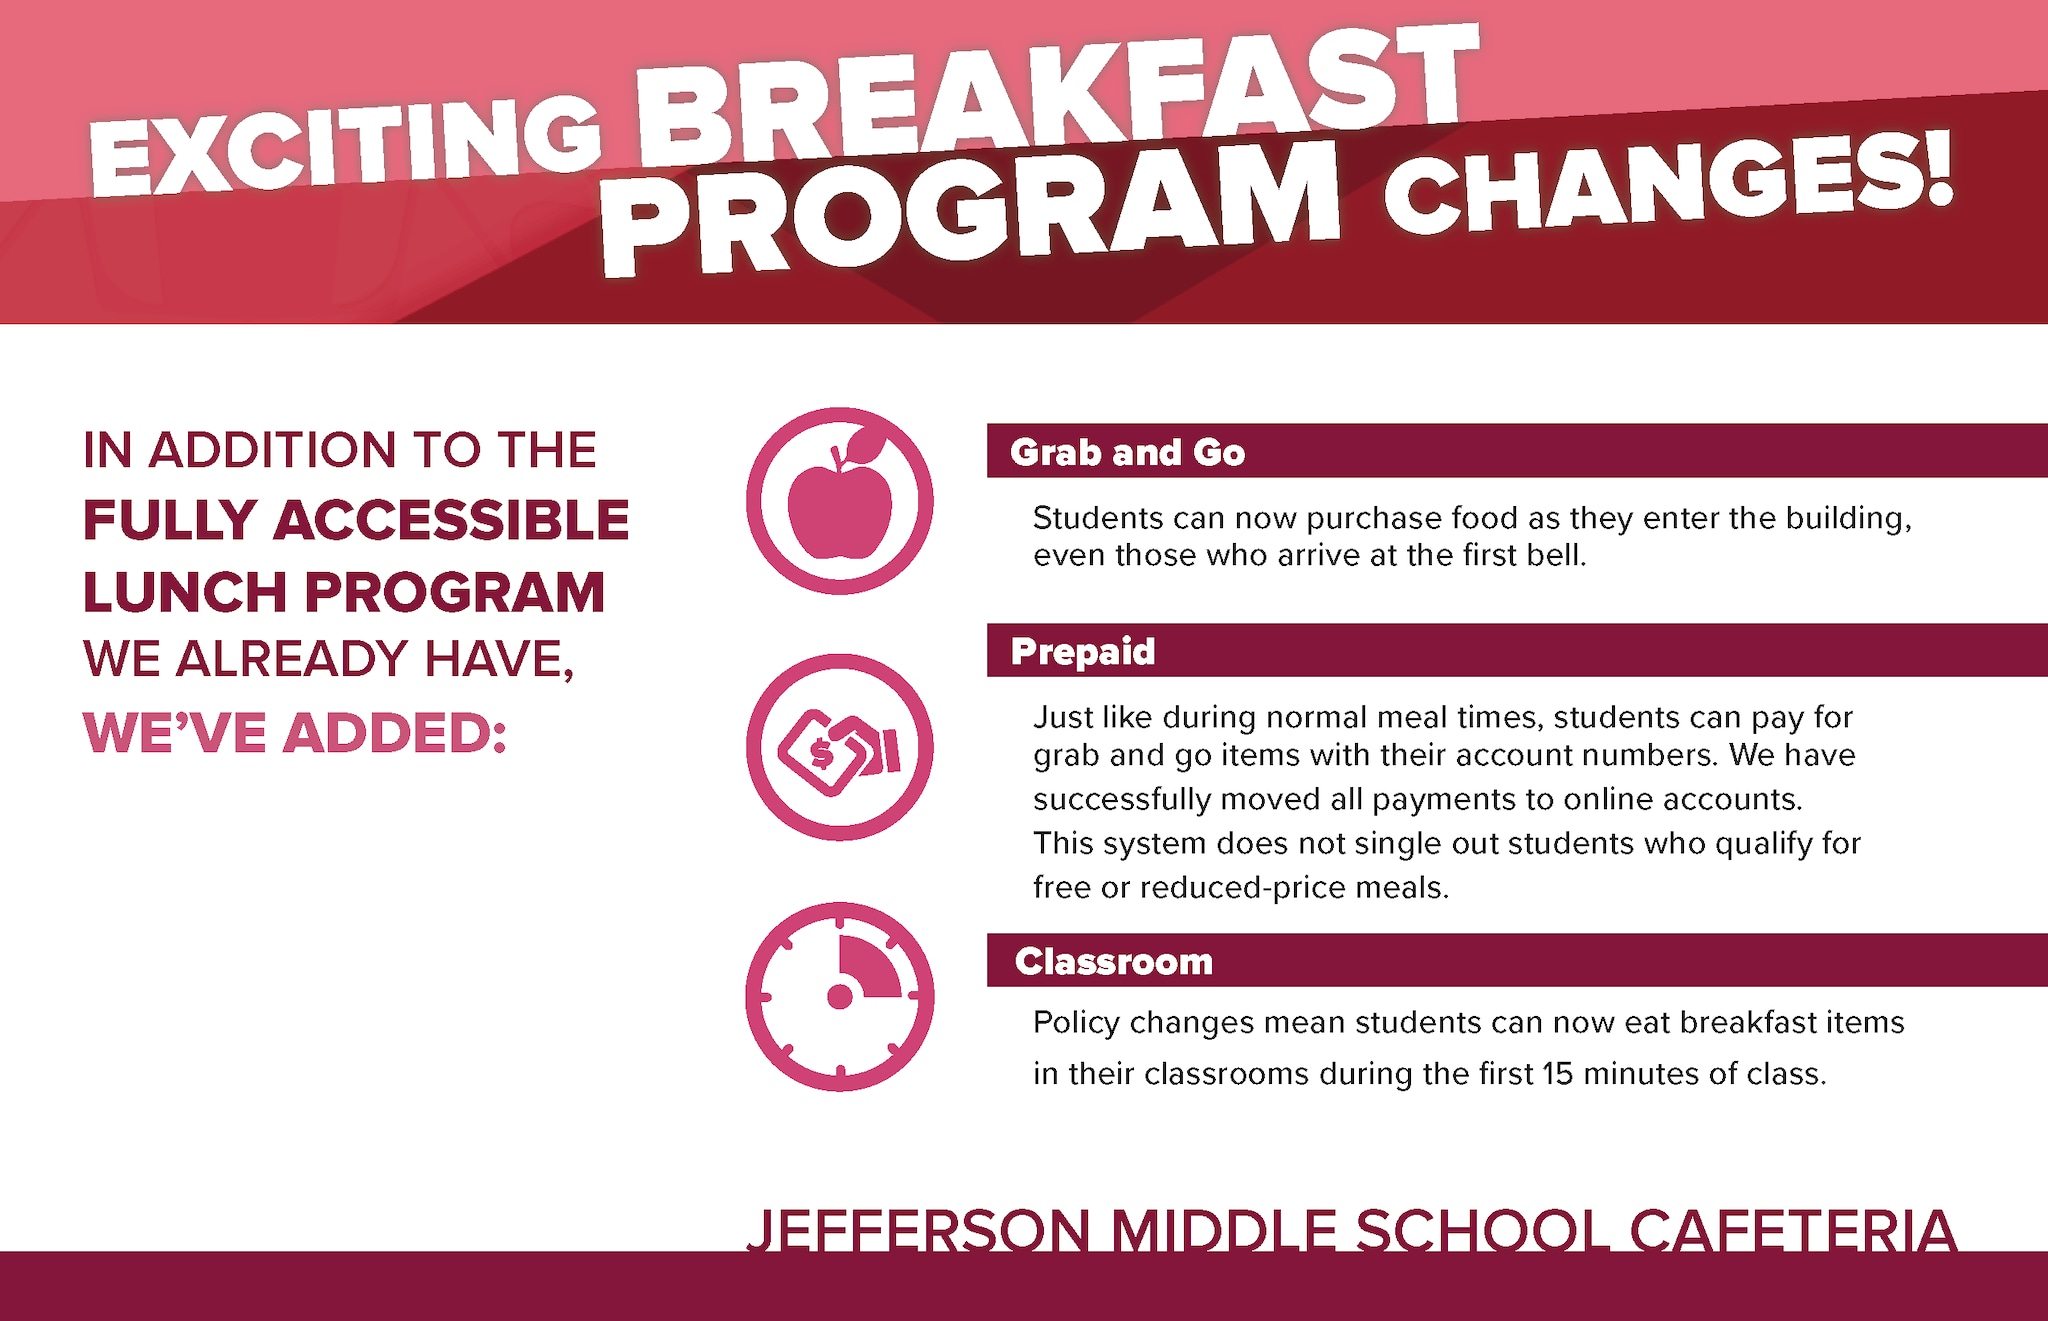 Flyer announcing Breakfast Program changes to complement the Accessible Lunch Program.Options are Grab and Go: students can now purchase food as they enter the building, even those who arrive at the first bell; Prepaid: students can pay for grab and go items with their online accounts, which does not single out students who qualify for free or reduced-price meals; and Classroom: students can now eat breakfast items in their classrooms during the first 15-minutes of class.